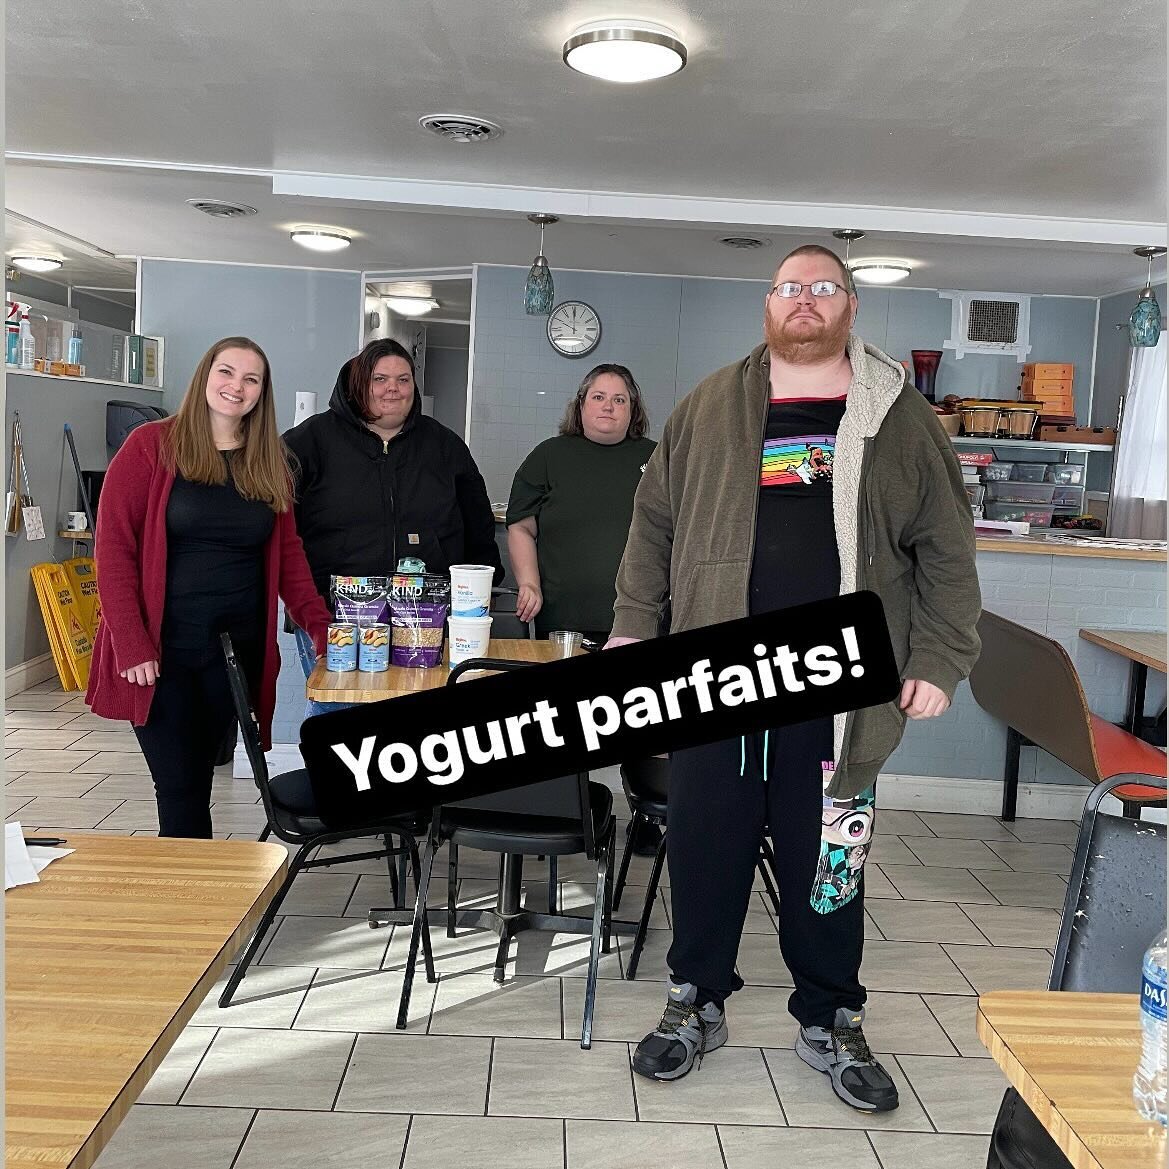 I went out to chat with my new friends at Self Reliance about nutrition today. We&rsquo;ll be meeting monthly to share ideas on how to make nutrition easy, tasty and affordable.

Today we whipped up some yogurt parfaits and taste-tested different yog